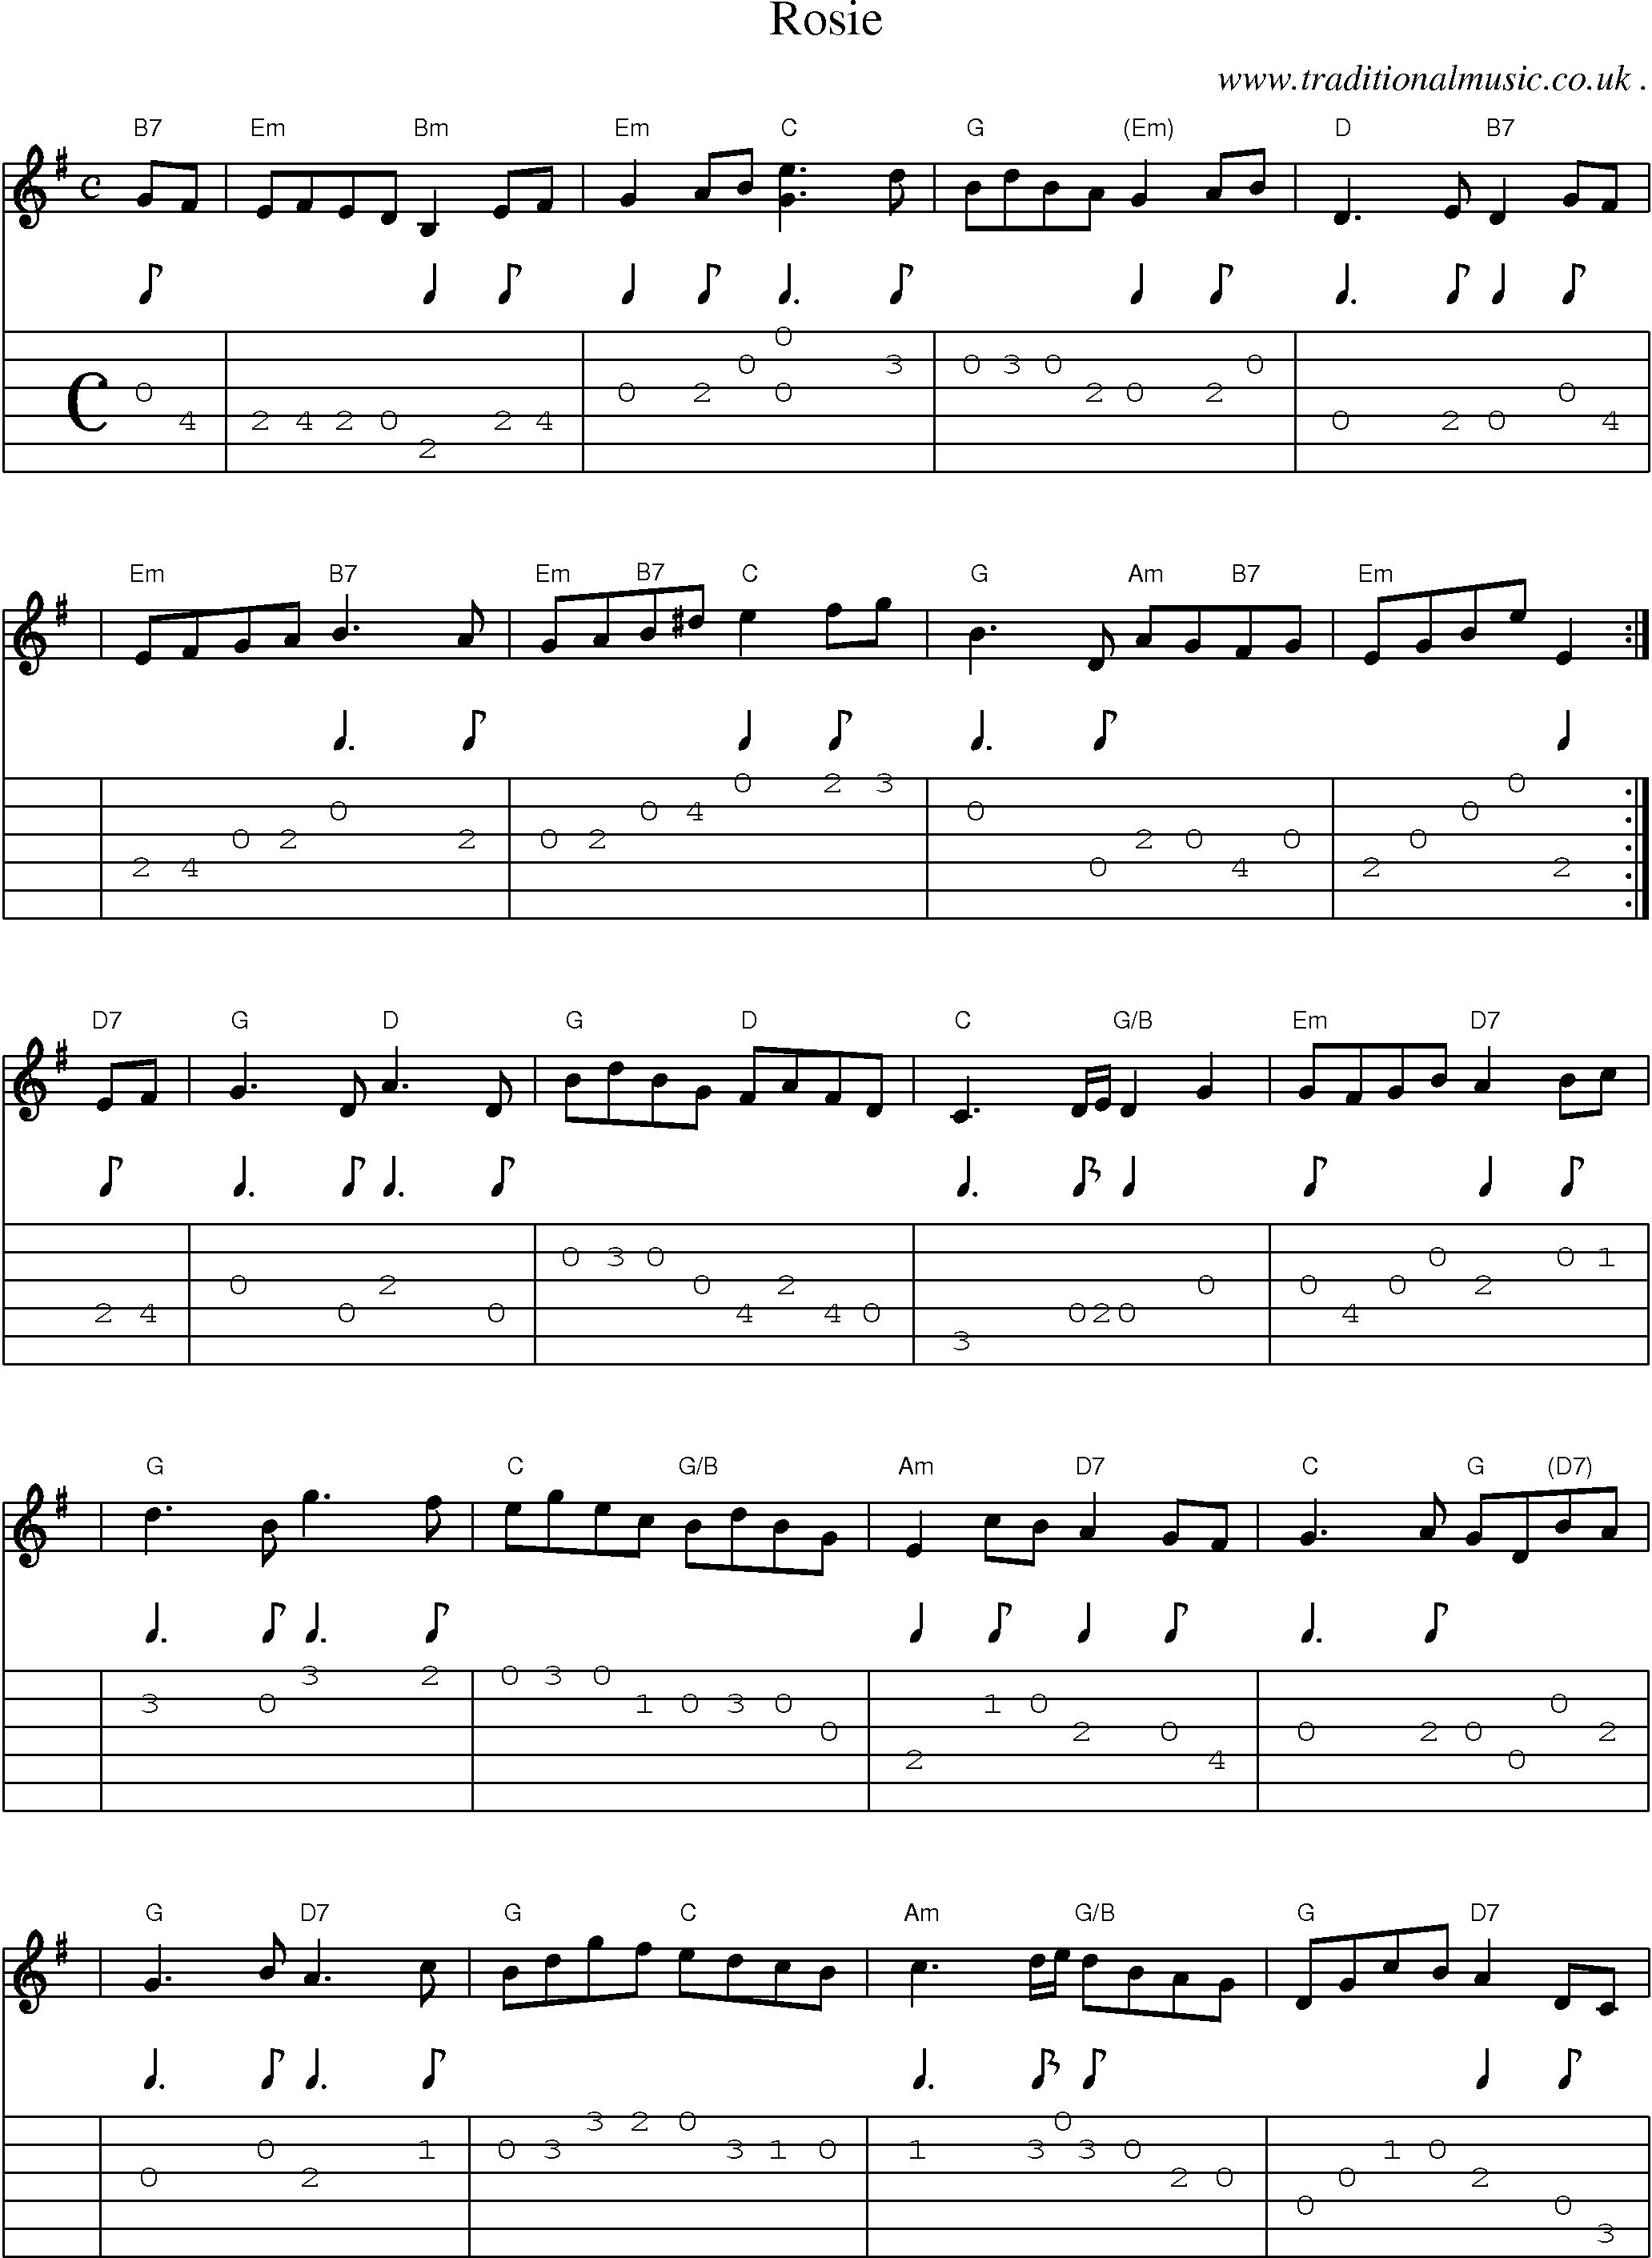 Sheet-music  score, Chords and Guitar Tabs for Rosie